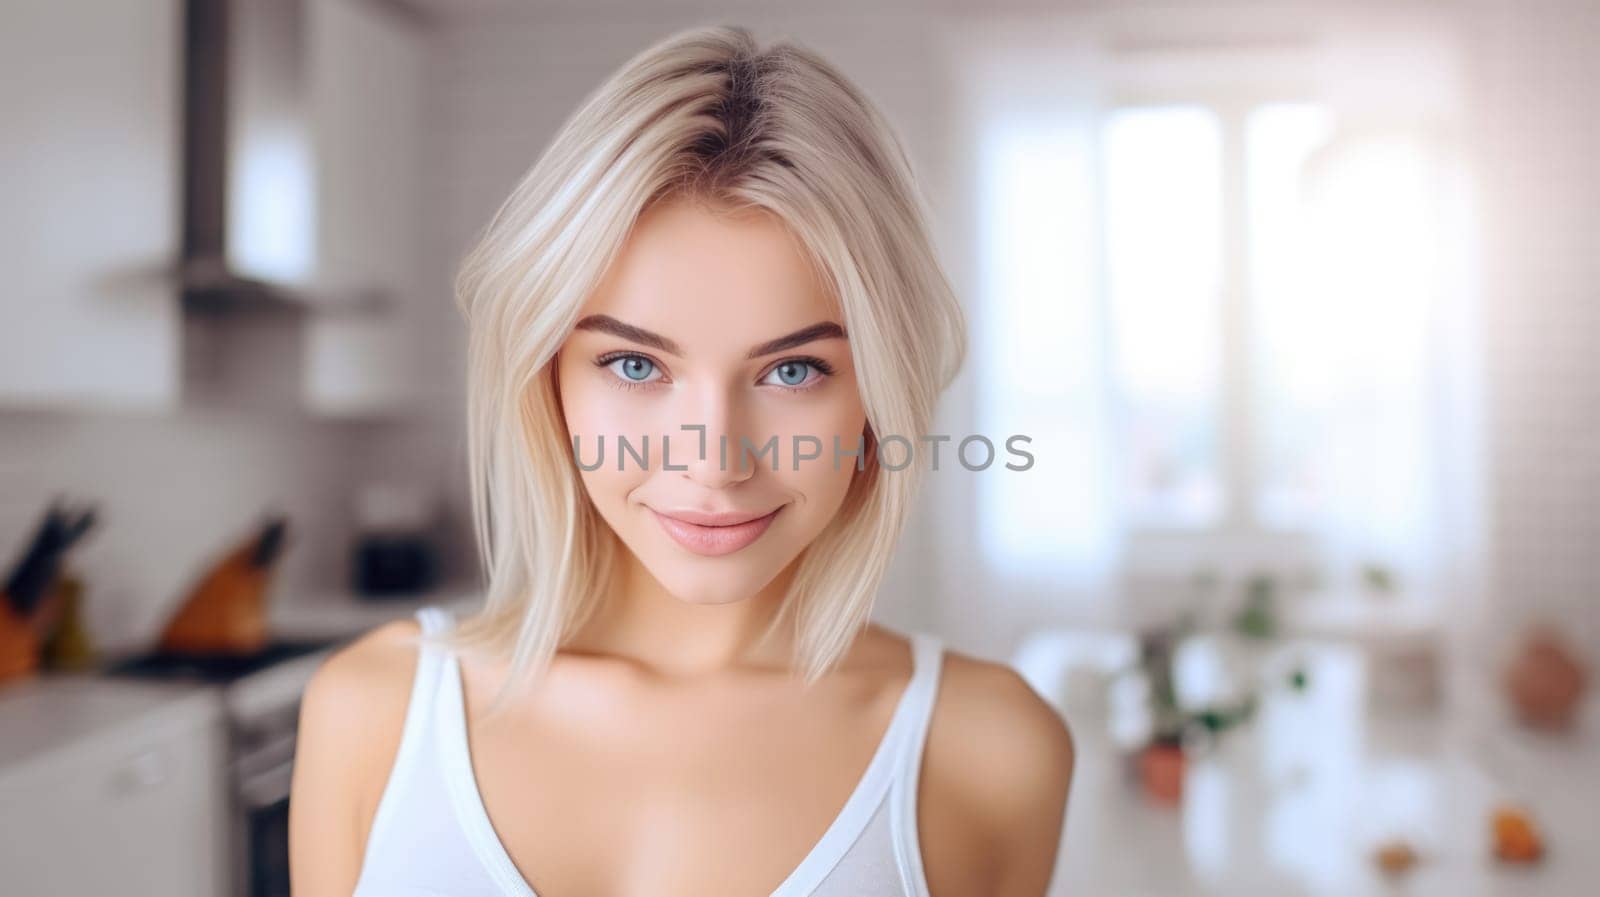 Portrait of beautiful blonde young woman with shaggy hairstyle smiling cheerfully, showing her white teeth to camera while feeling happy blurred kitchen background.